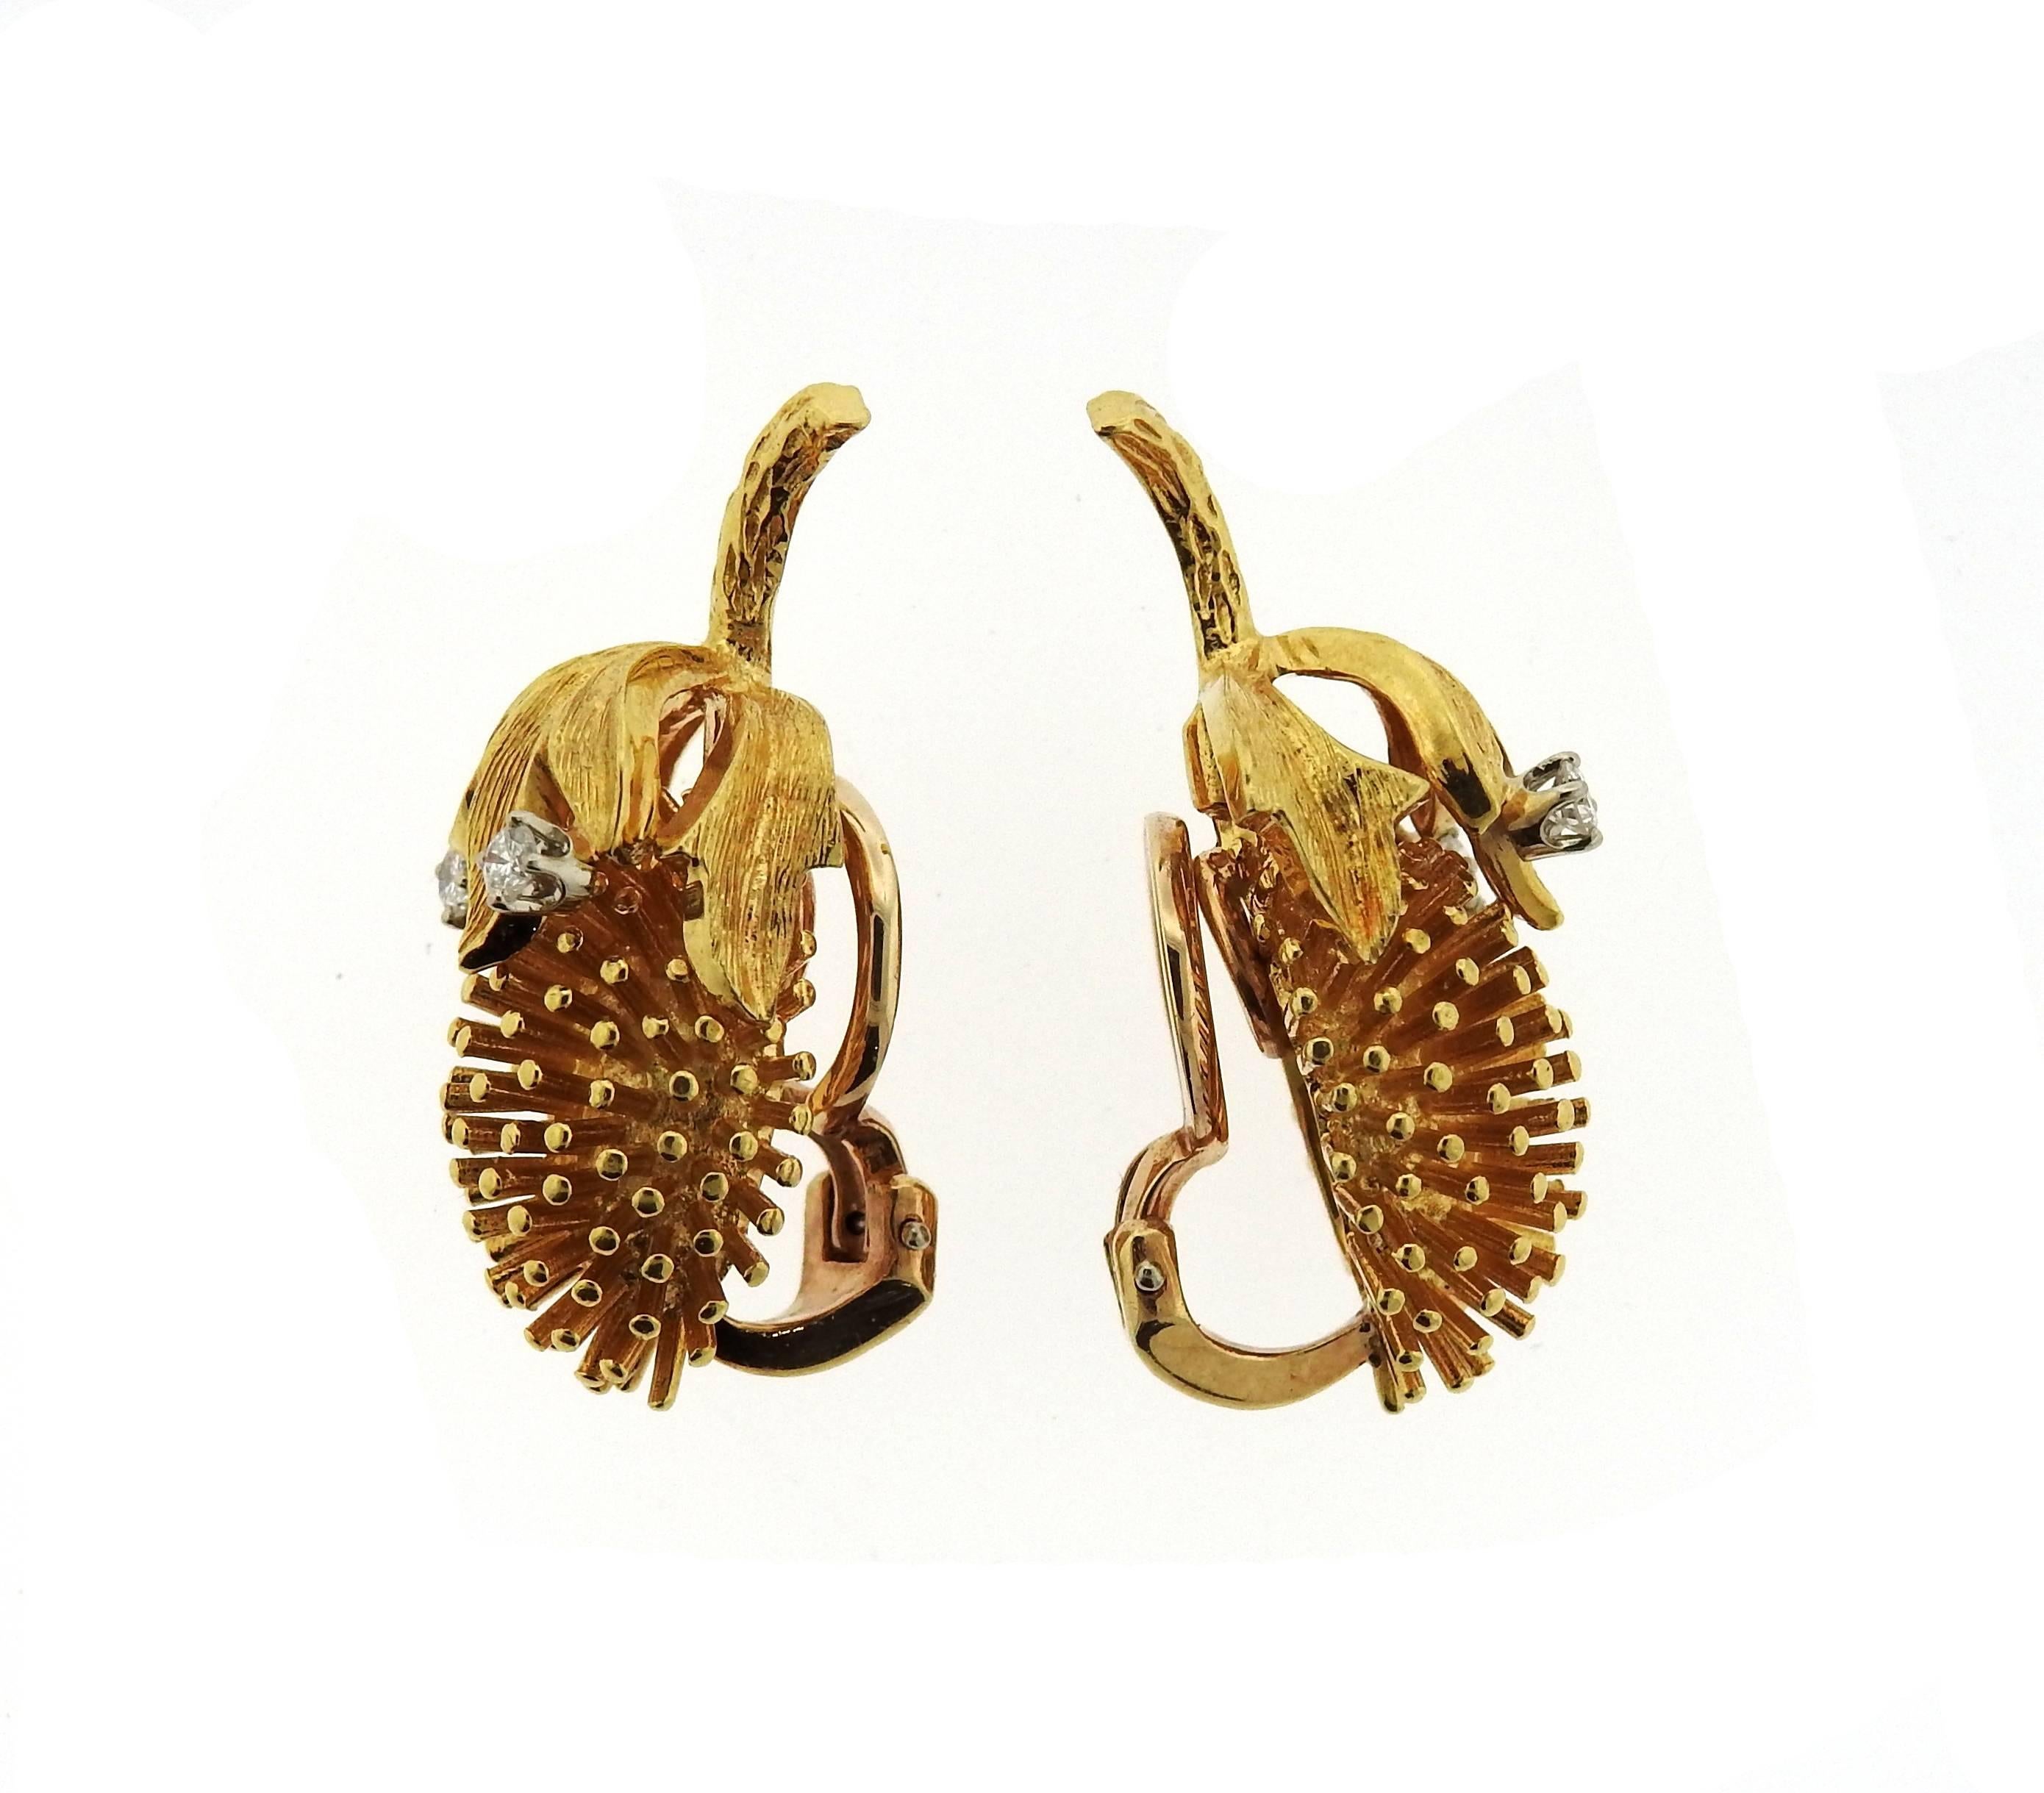 A pair of 14k yellow gold earrings set with approximately 0.20ctw of H/VS diamonds.  The earrings measure 30mm x 15mm and weigh 17 grams.  Marked: 14k, CDL.